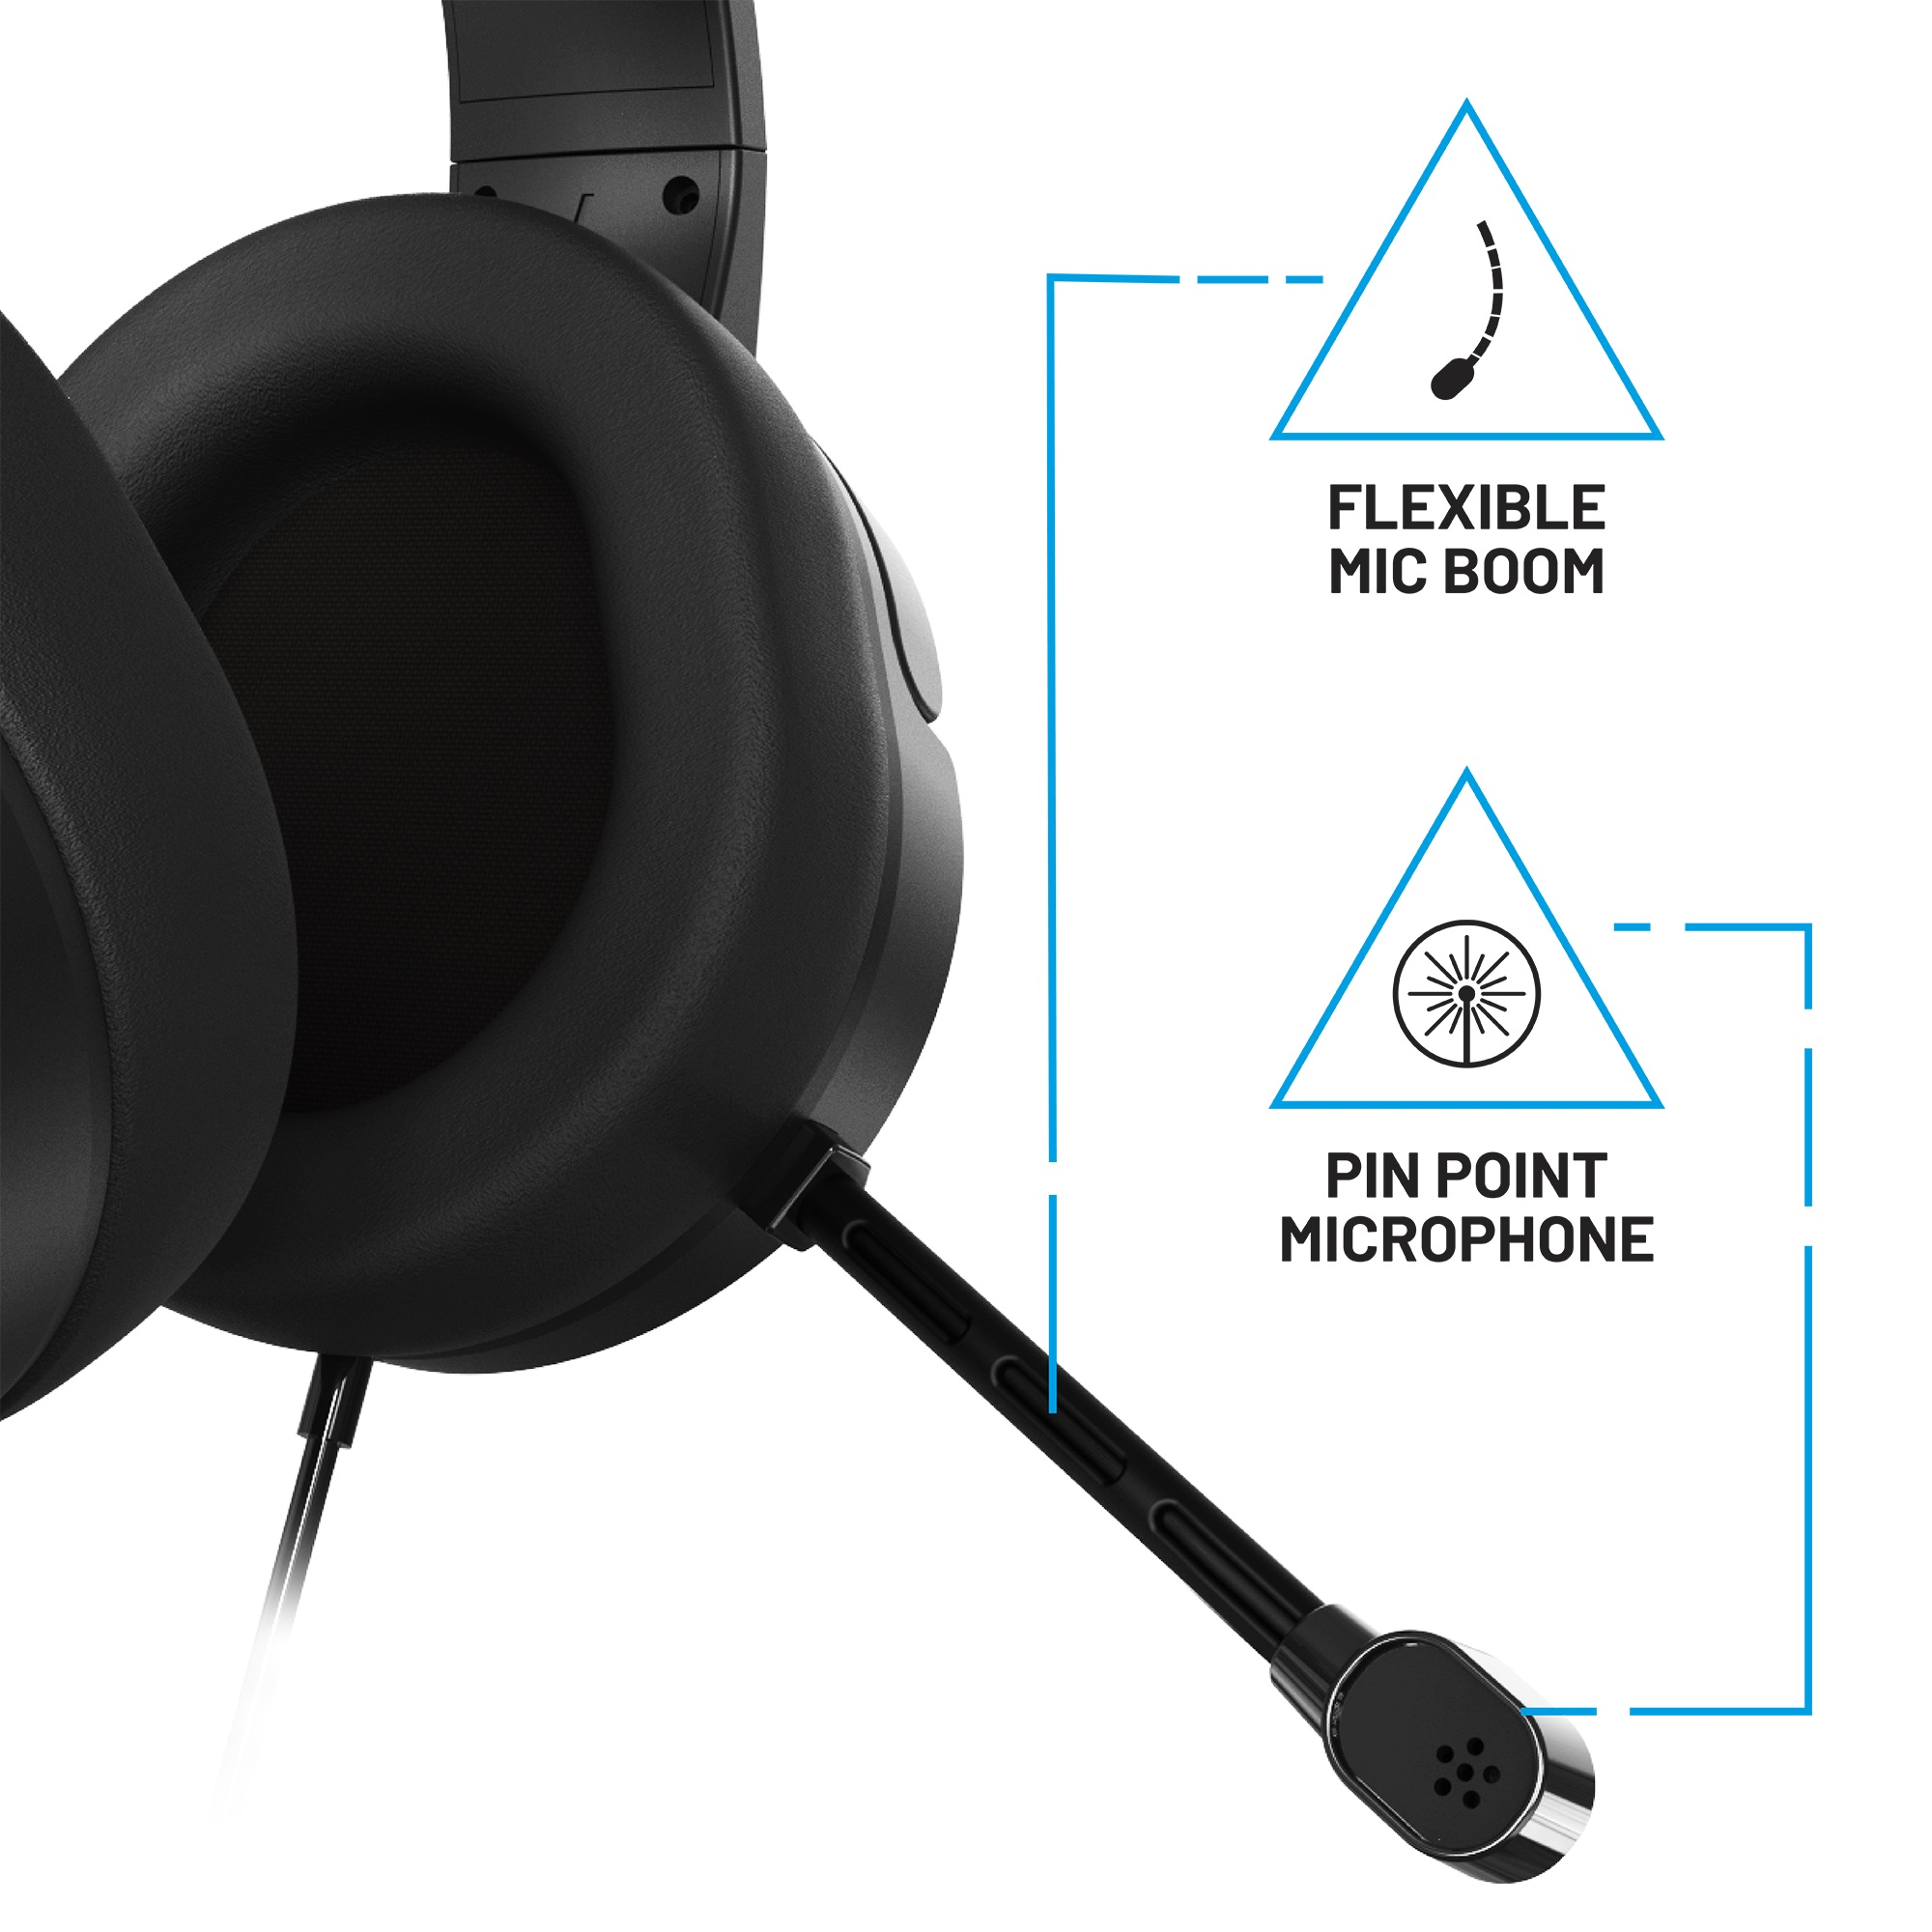 Headset STEALTH Headset Schwarz Panther Over-ear Gaming (PS4/PS5/XBOX/NSW), Gaming